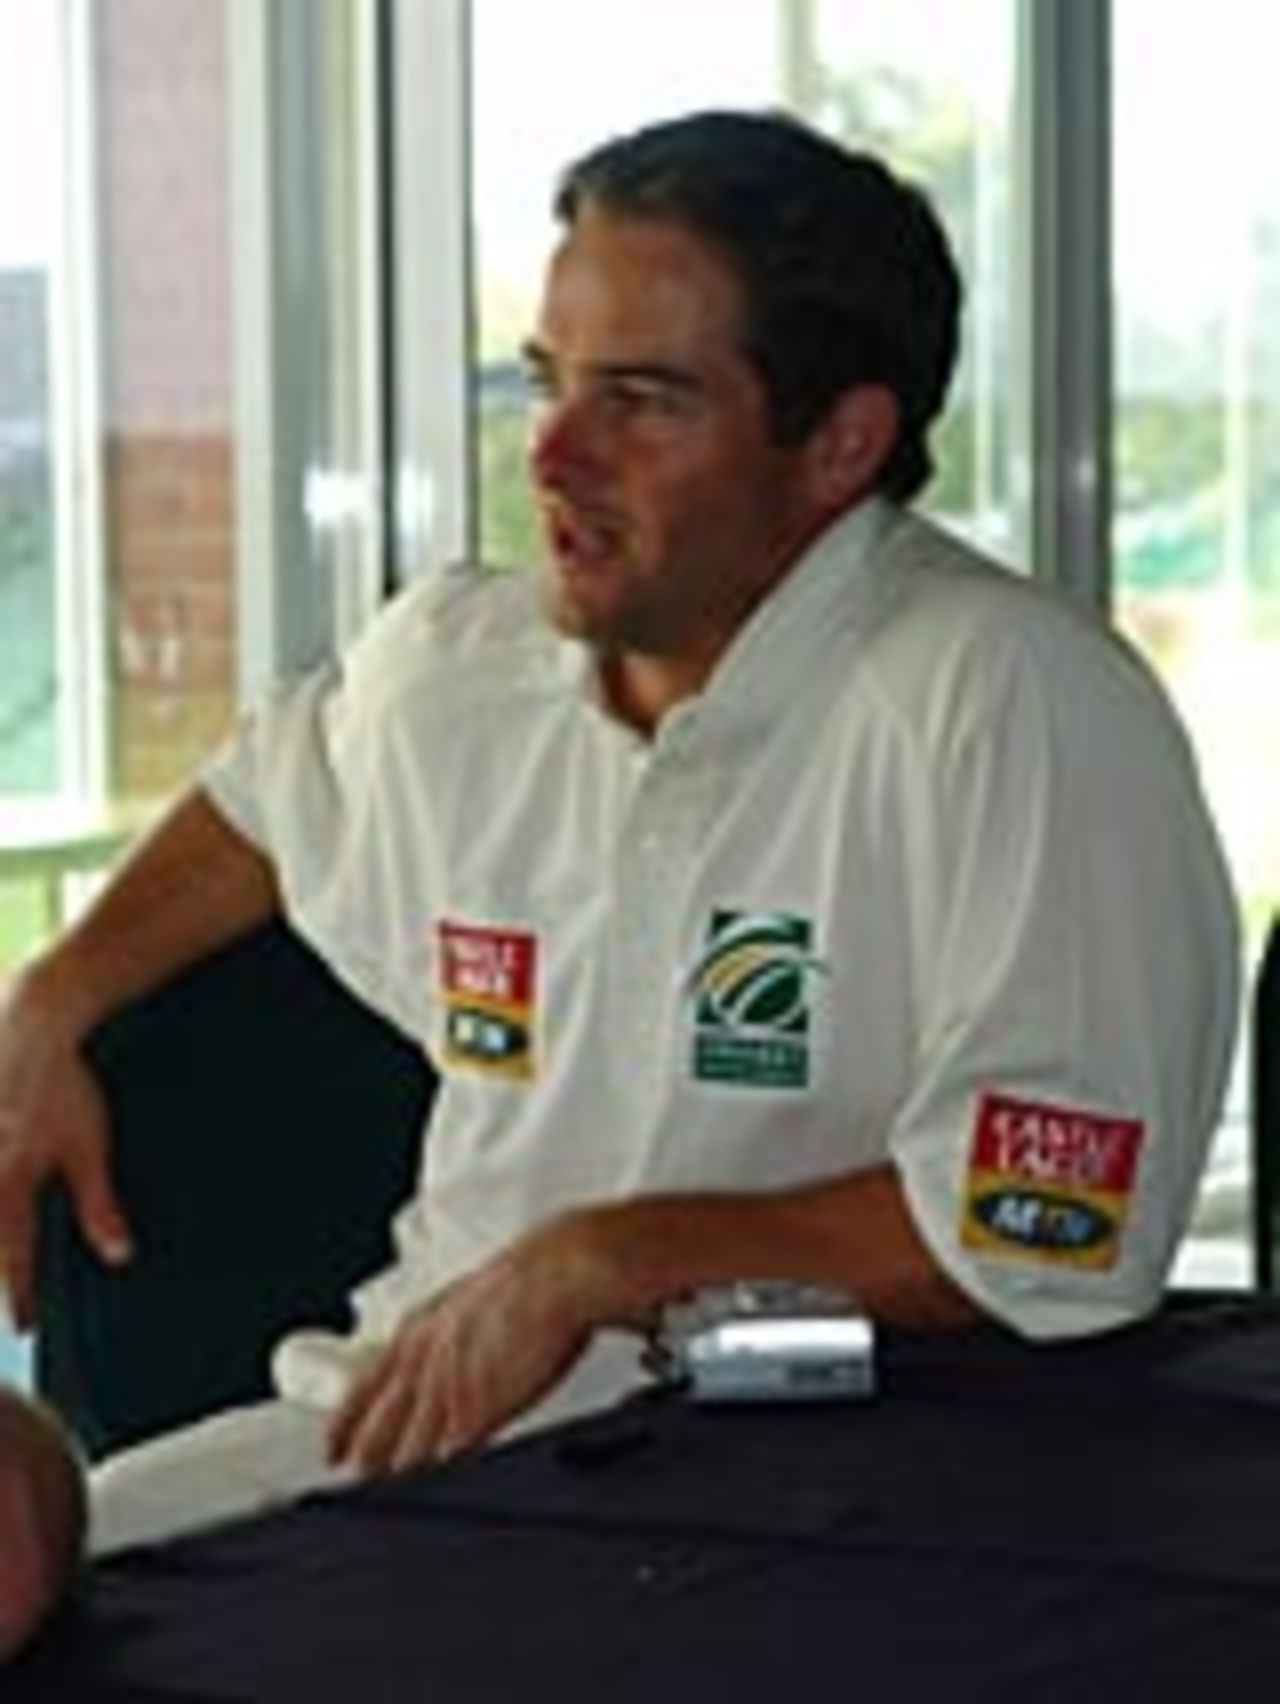 A relaxed Mark Boucher chats to the media, Potchefstroom, December 13, 2004